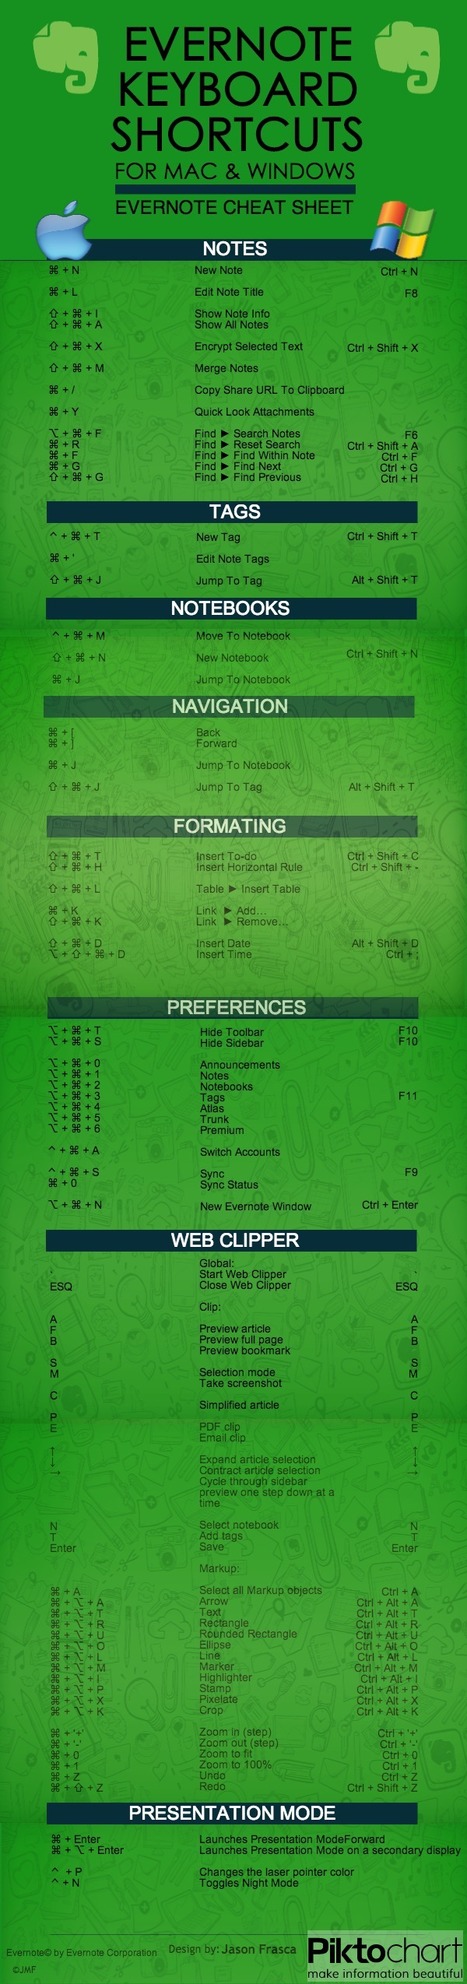 Evernote Keyboard Shortcuts for Mac & Windows Cheat Sheet [INFOGRAPHIC] | E-Learning-Inclusivo (Mashup) | Scoop.it